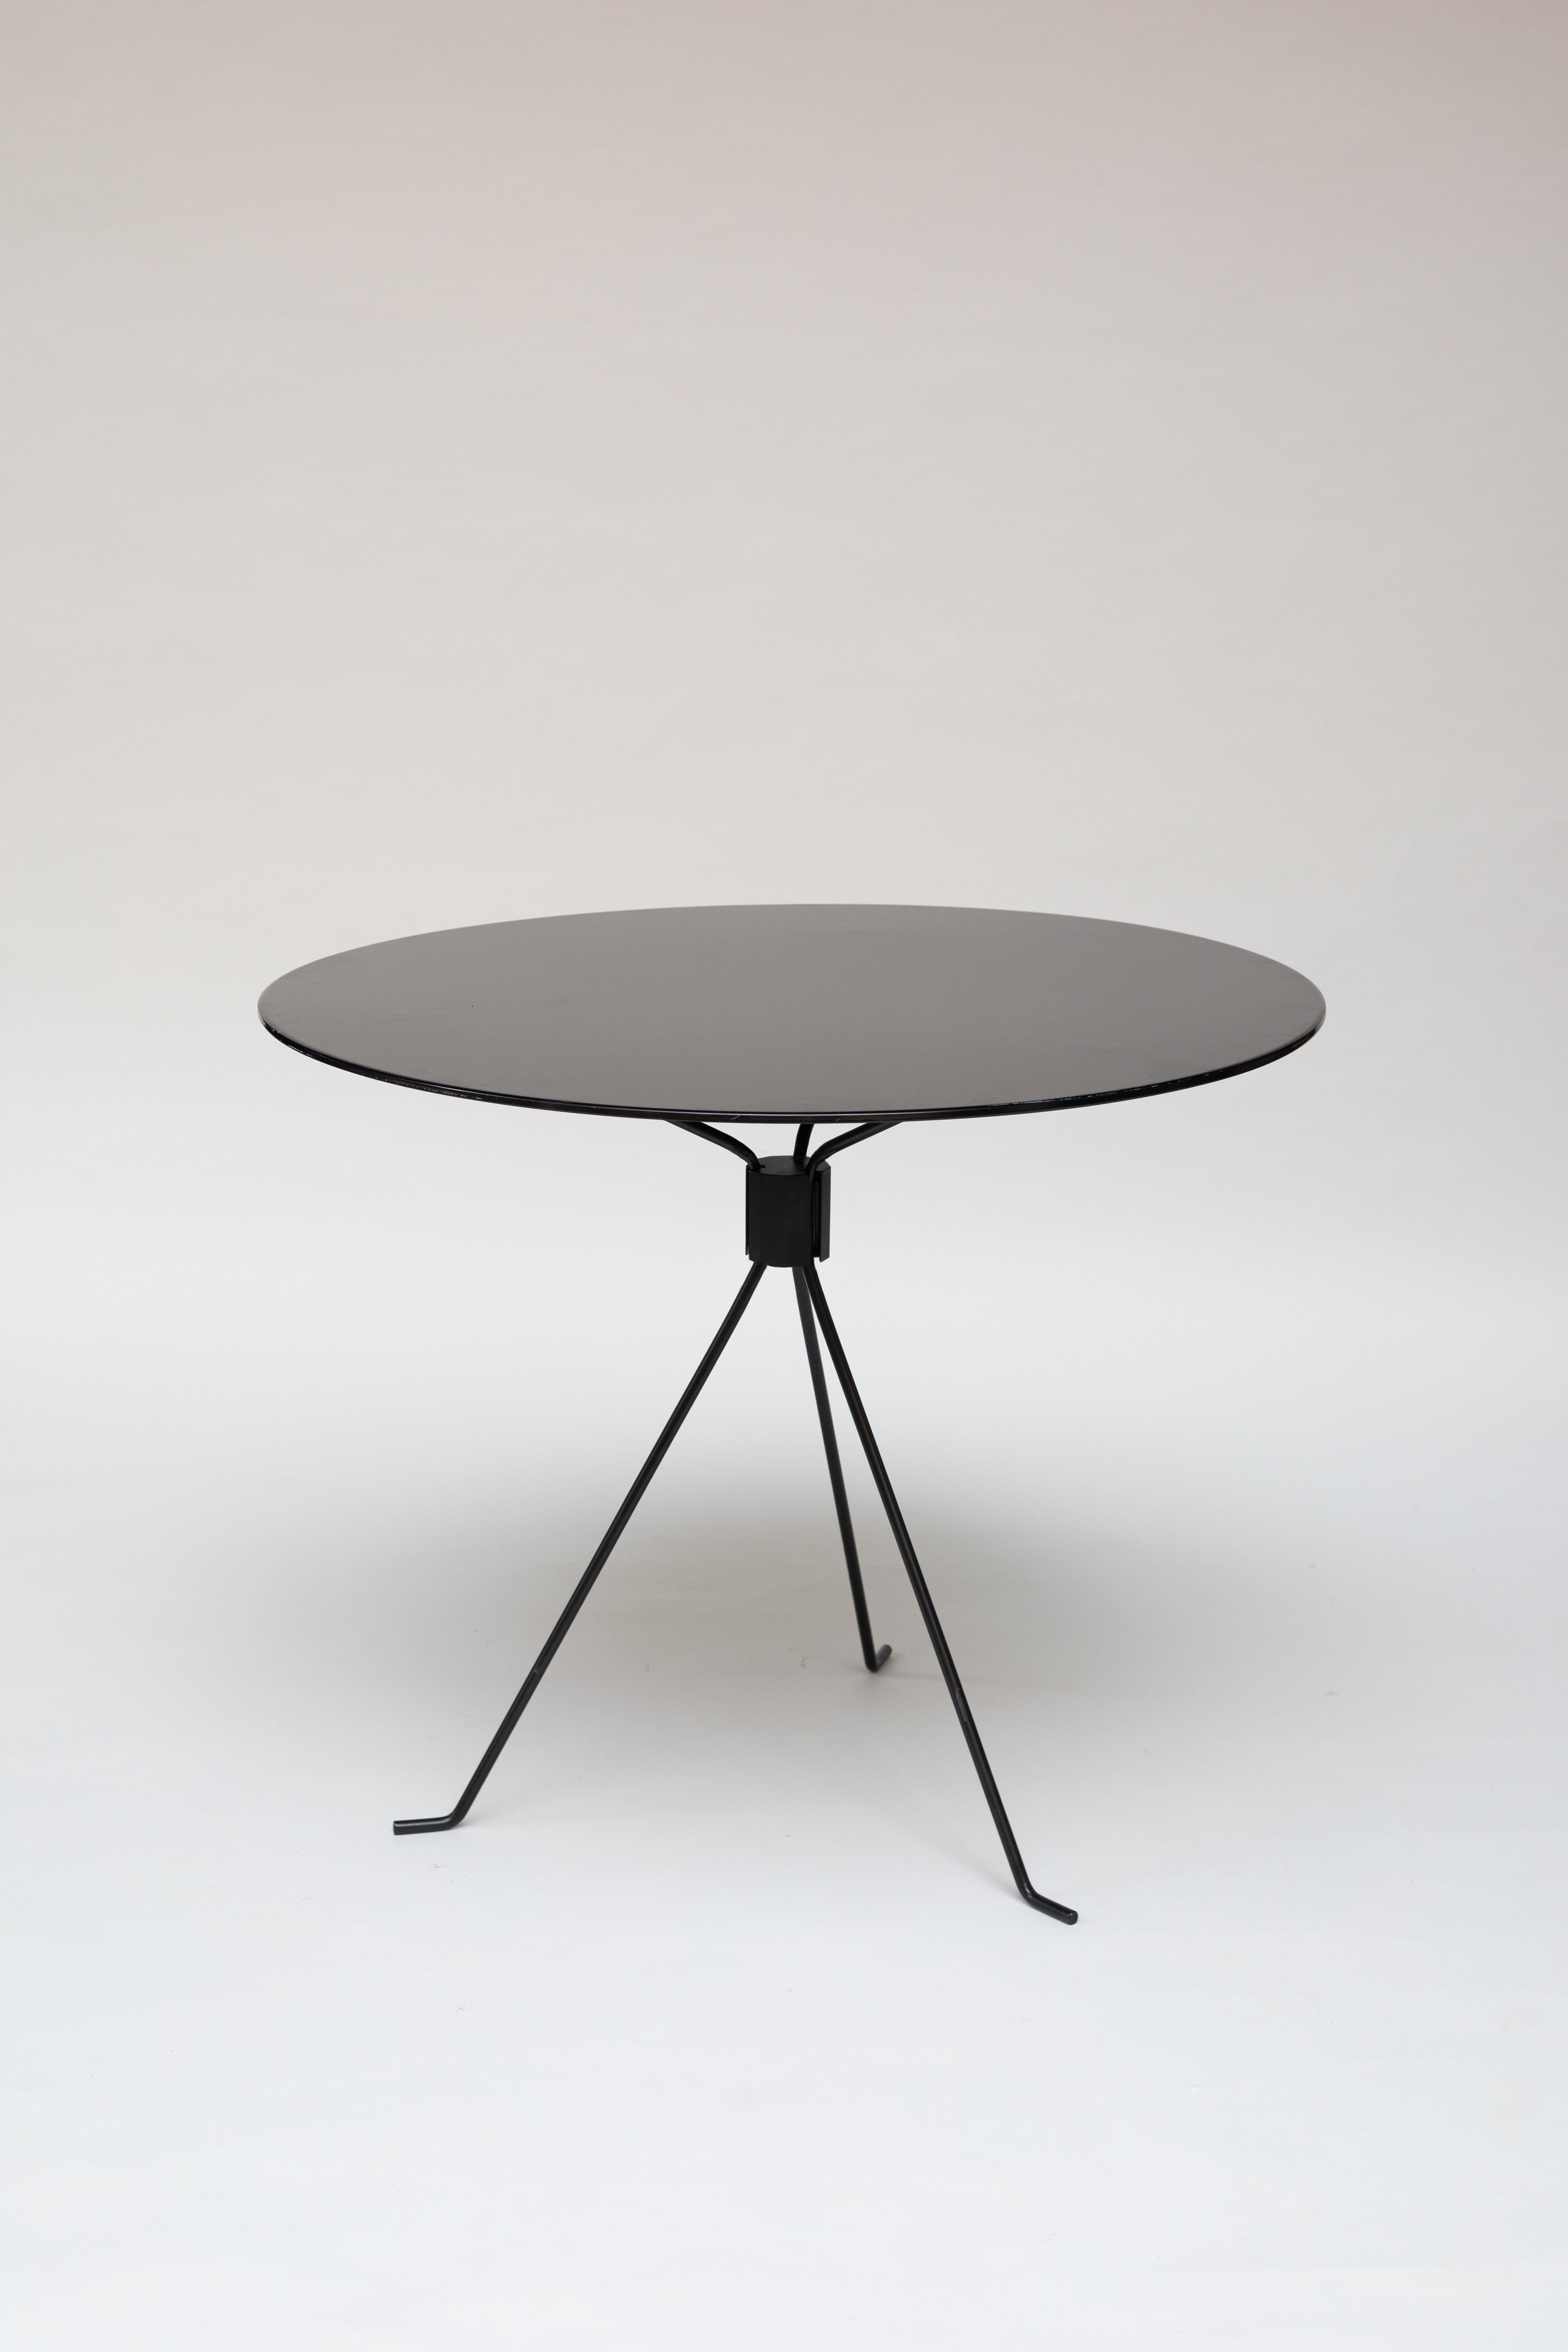 Other Small Black Capri Bond Table by Cools Collection For Sale